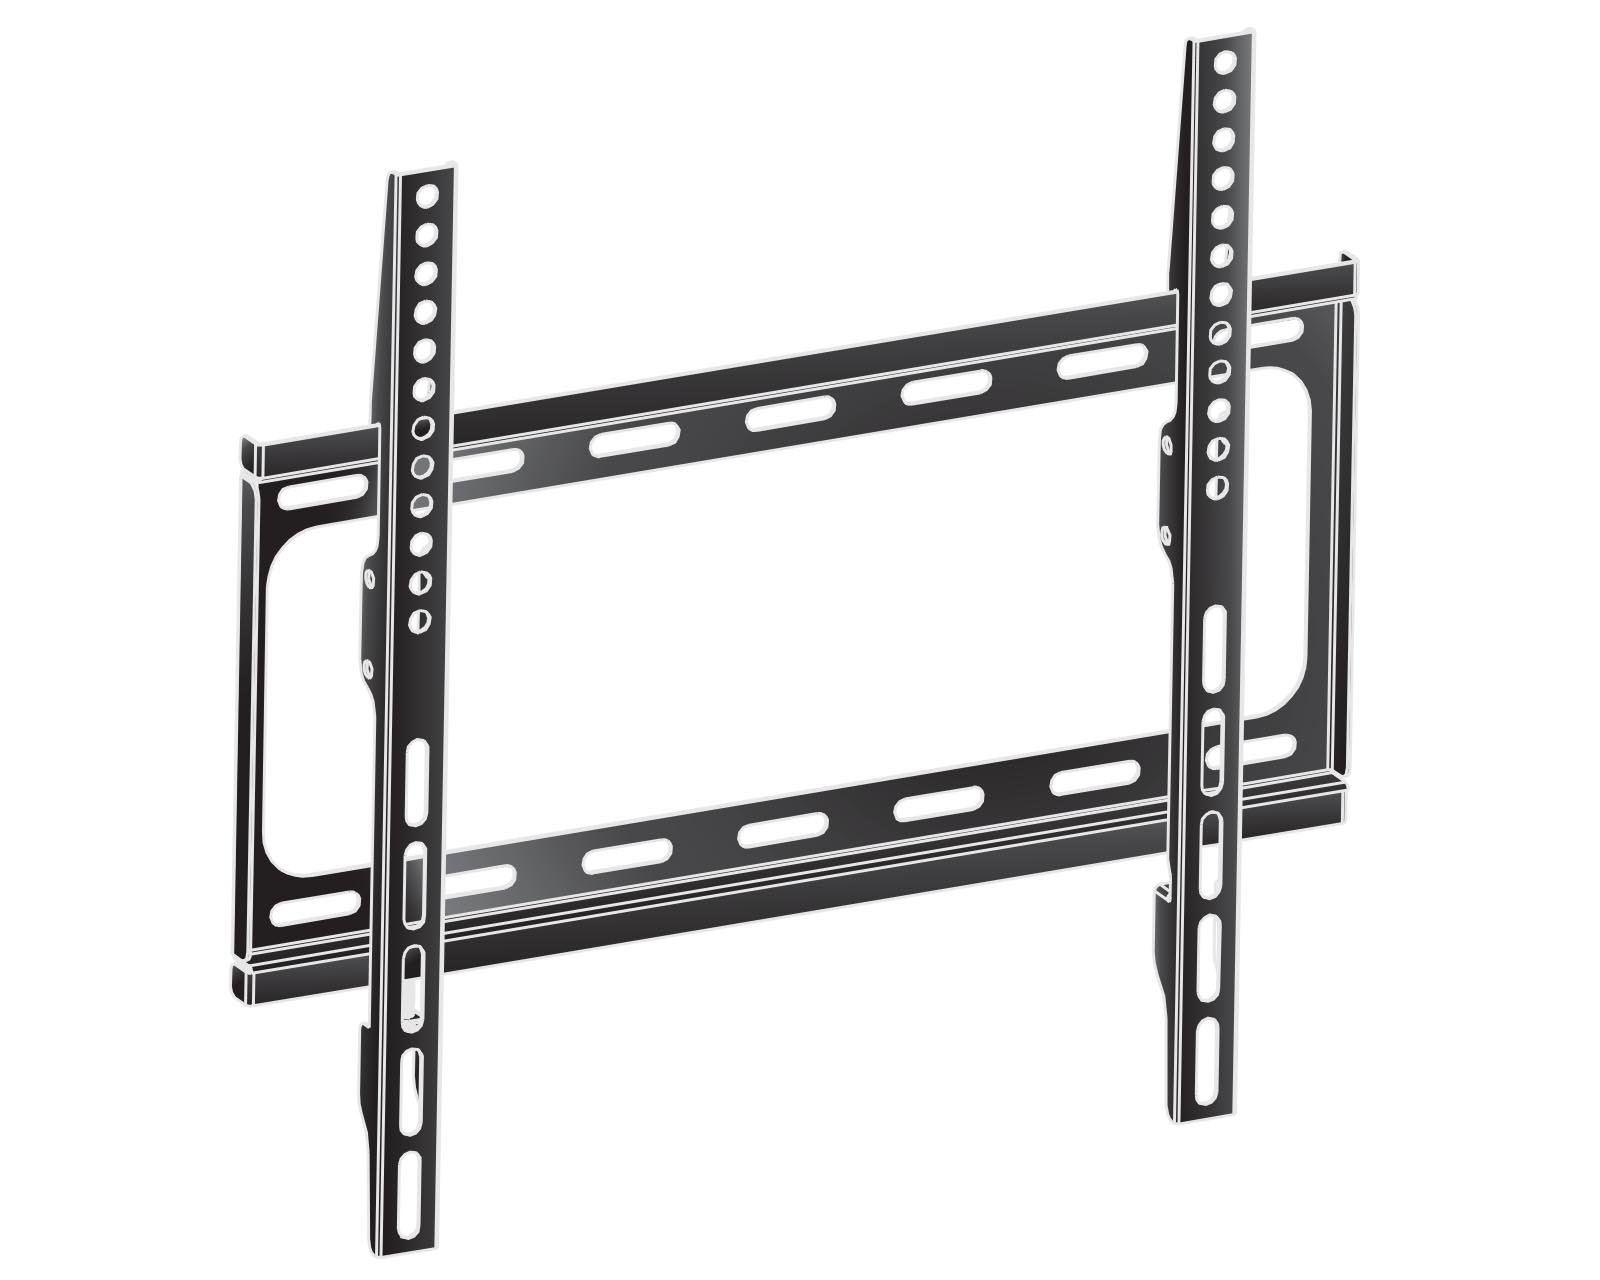 Universal Wall Mount  Max. Load 30 kg  max. 400 x 400 mm for non-touch monitors packed with bubble level for easy installation